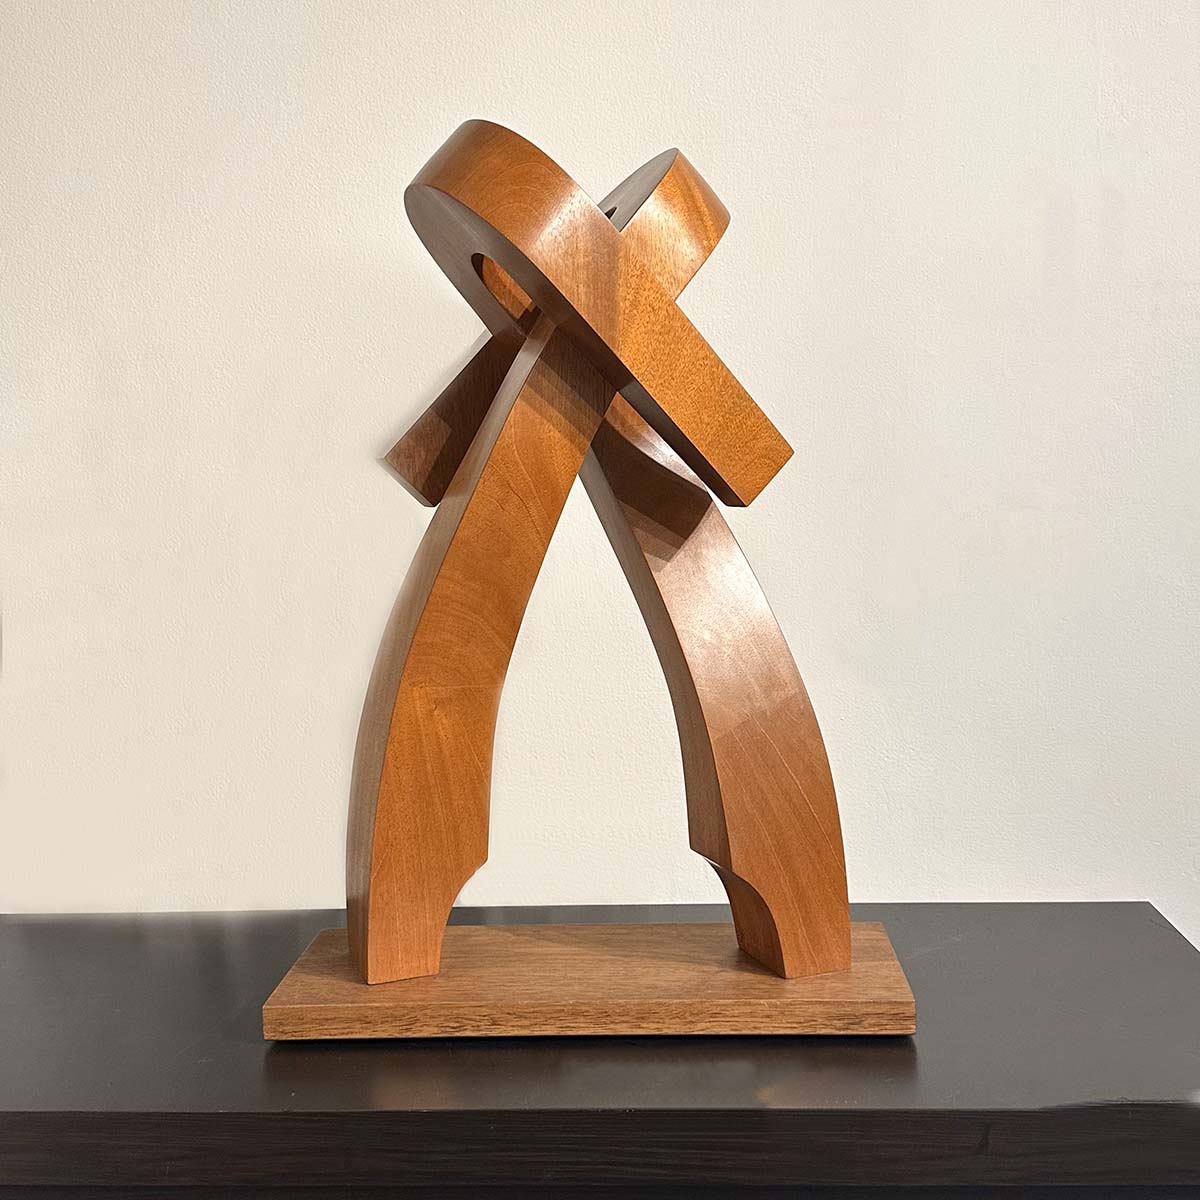 Contemporary Sculpture. Title: Contradiction, Mahogany, 24x15x10 in by Canadian artist Serge Mozhnevsky.